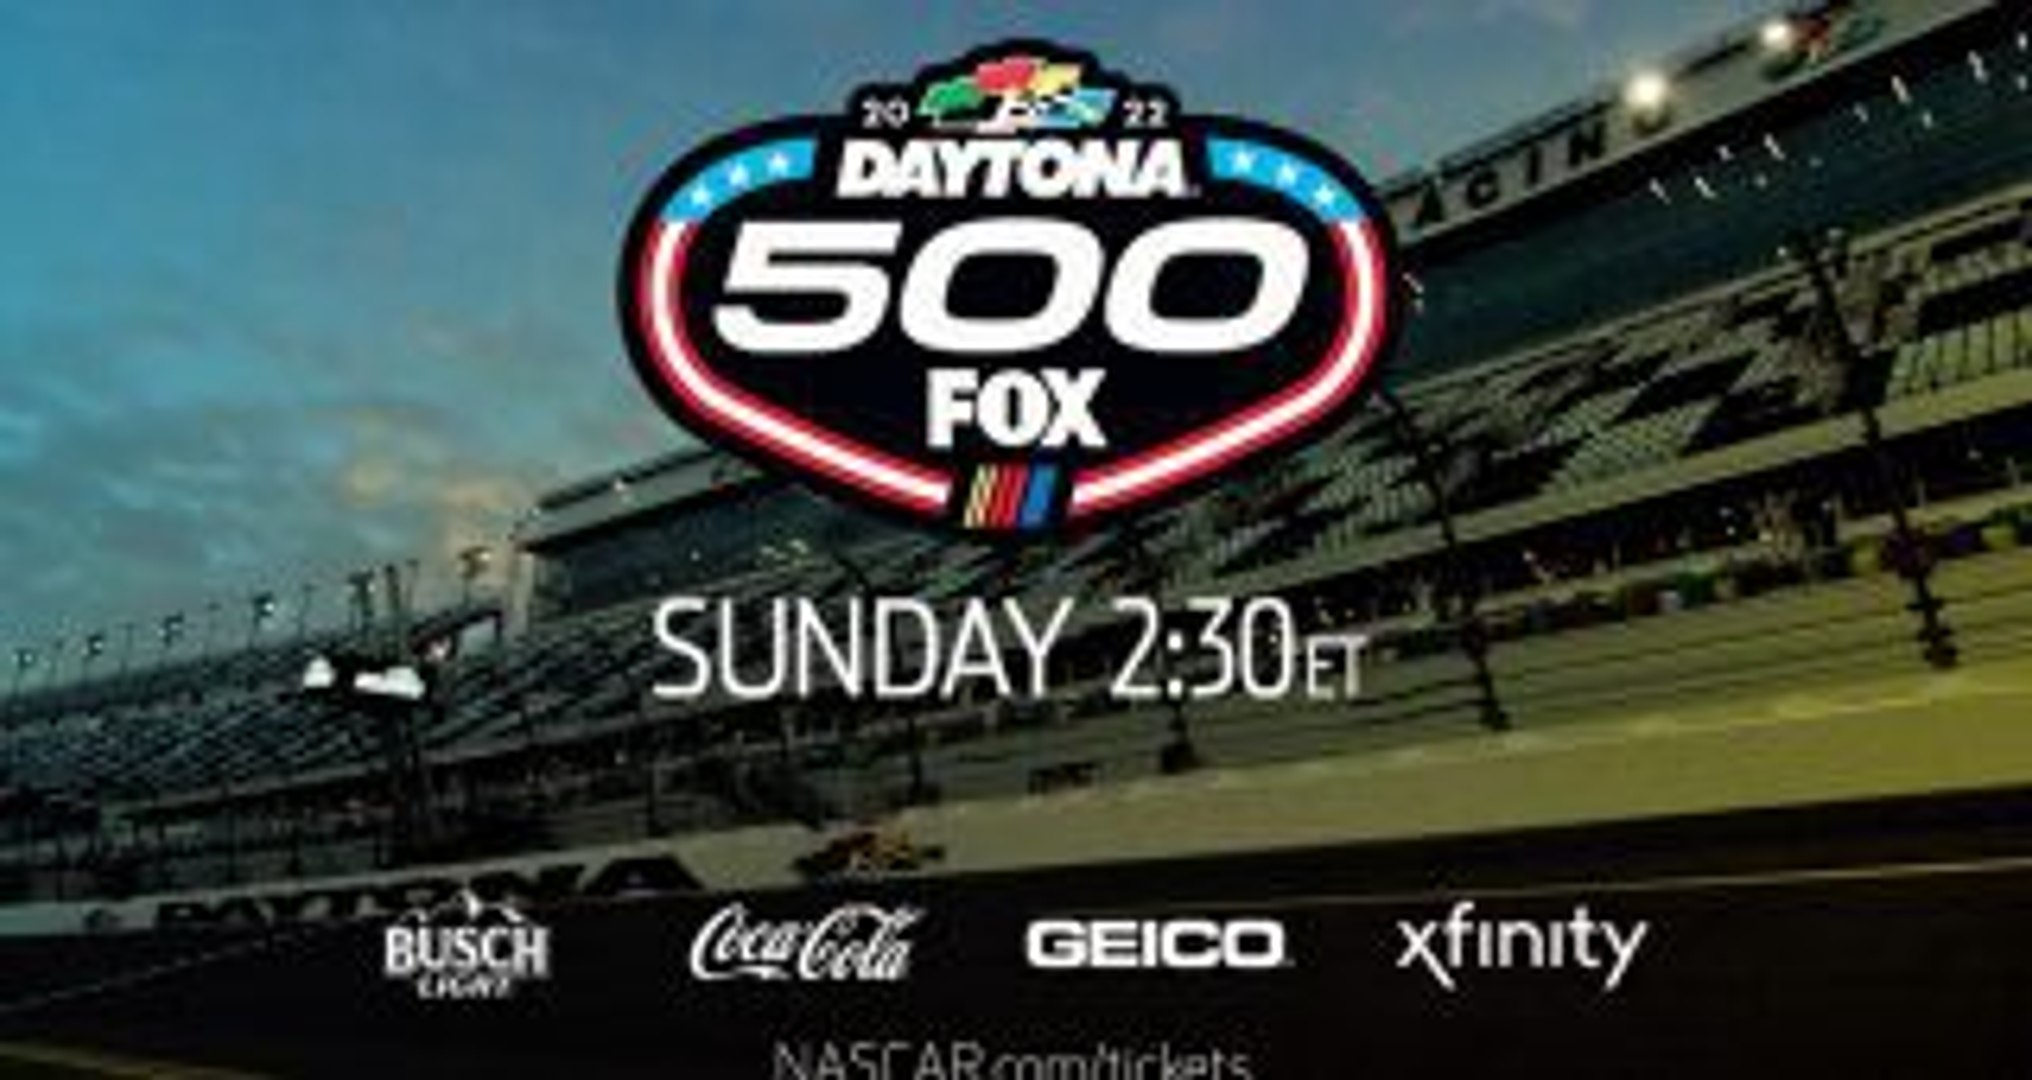 Get Ready! The 2022 Daytona 500 is here